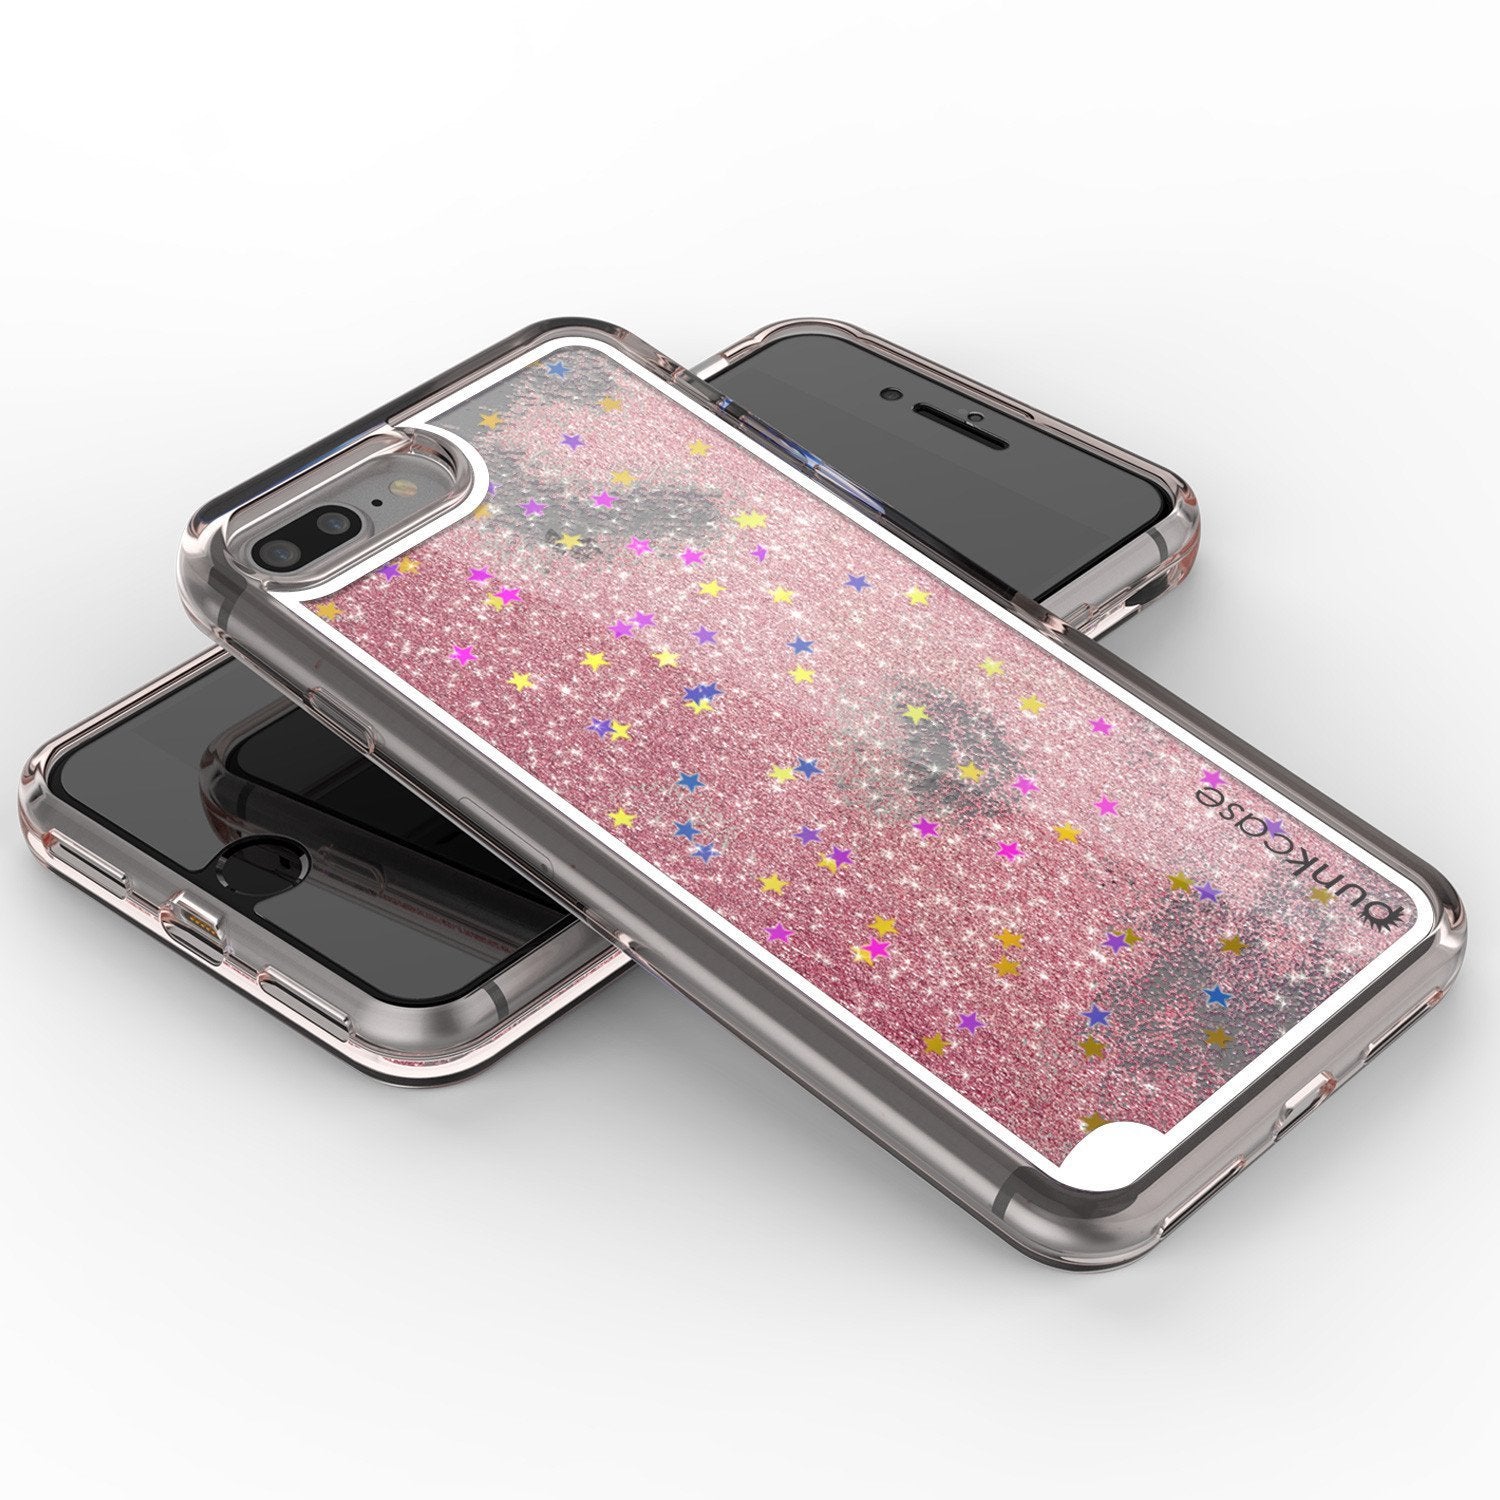 iPhone 8+ Plus Case, PunkCase LIQUID Rose Series, Protective Dual Layer Floating Glitter Cover